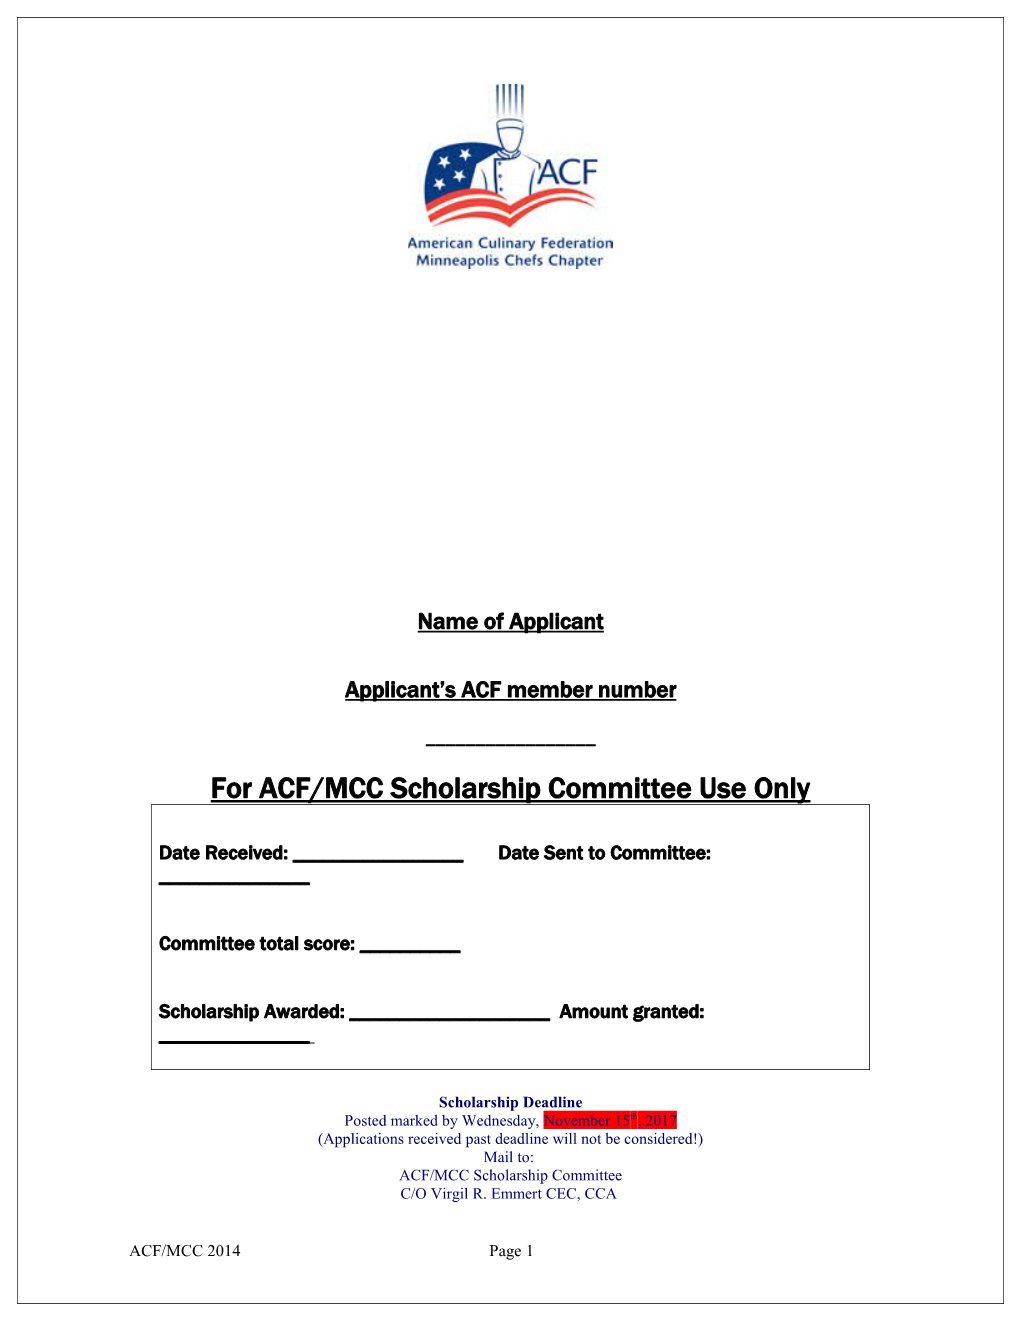 For ACF/MCC Scholarship Committee Use Only